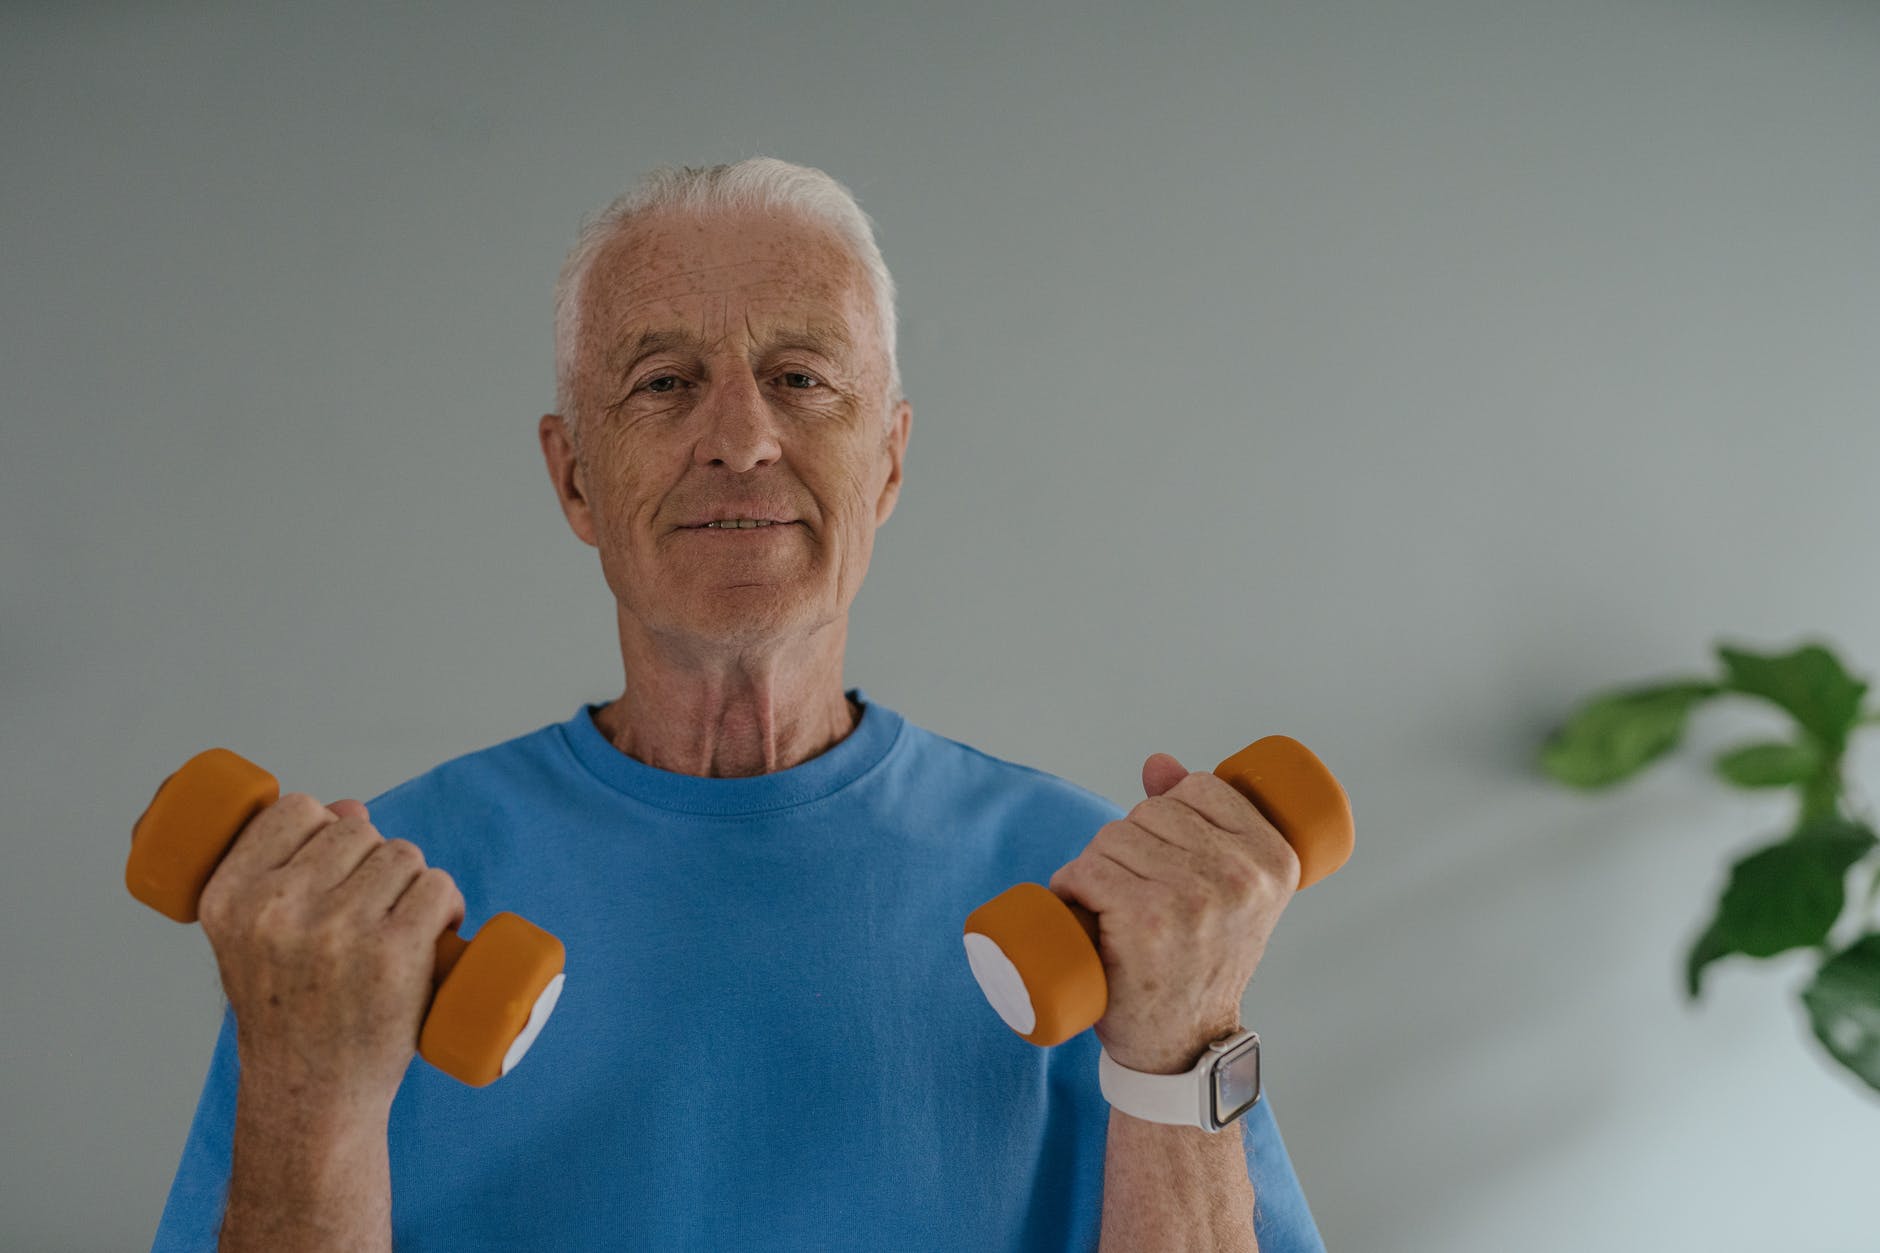 An older man who is staying active and fit.